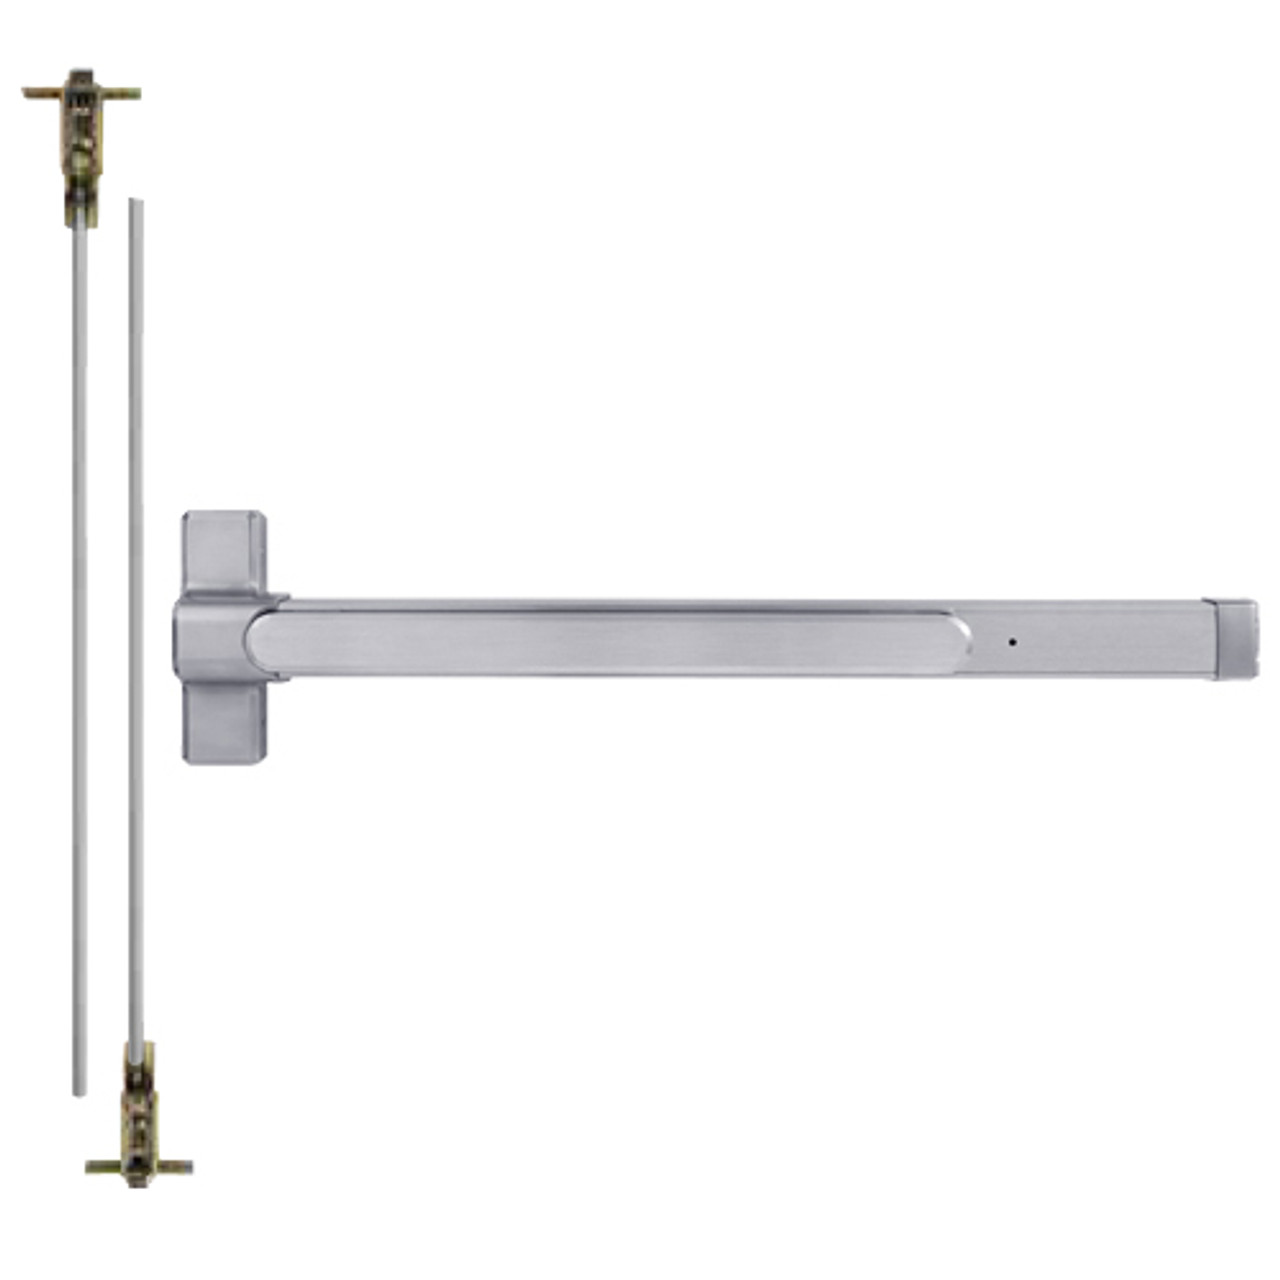 QED126LR-36-7-626 Stanley QED100 Series Heavy Duty Concealed Vertical Rod Fire Rated Exit Device in Satin Chrome Finish